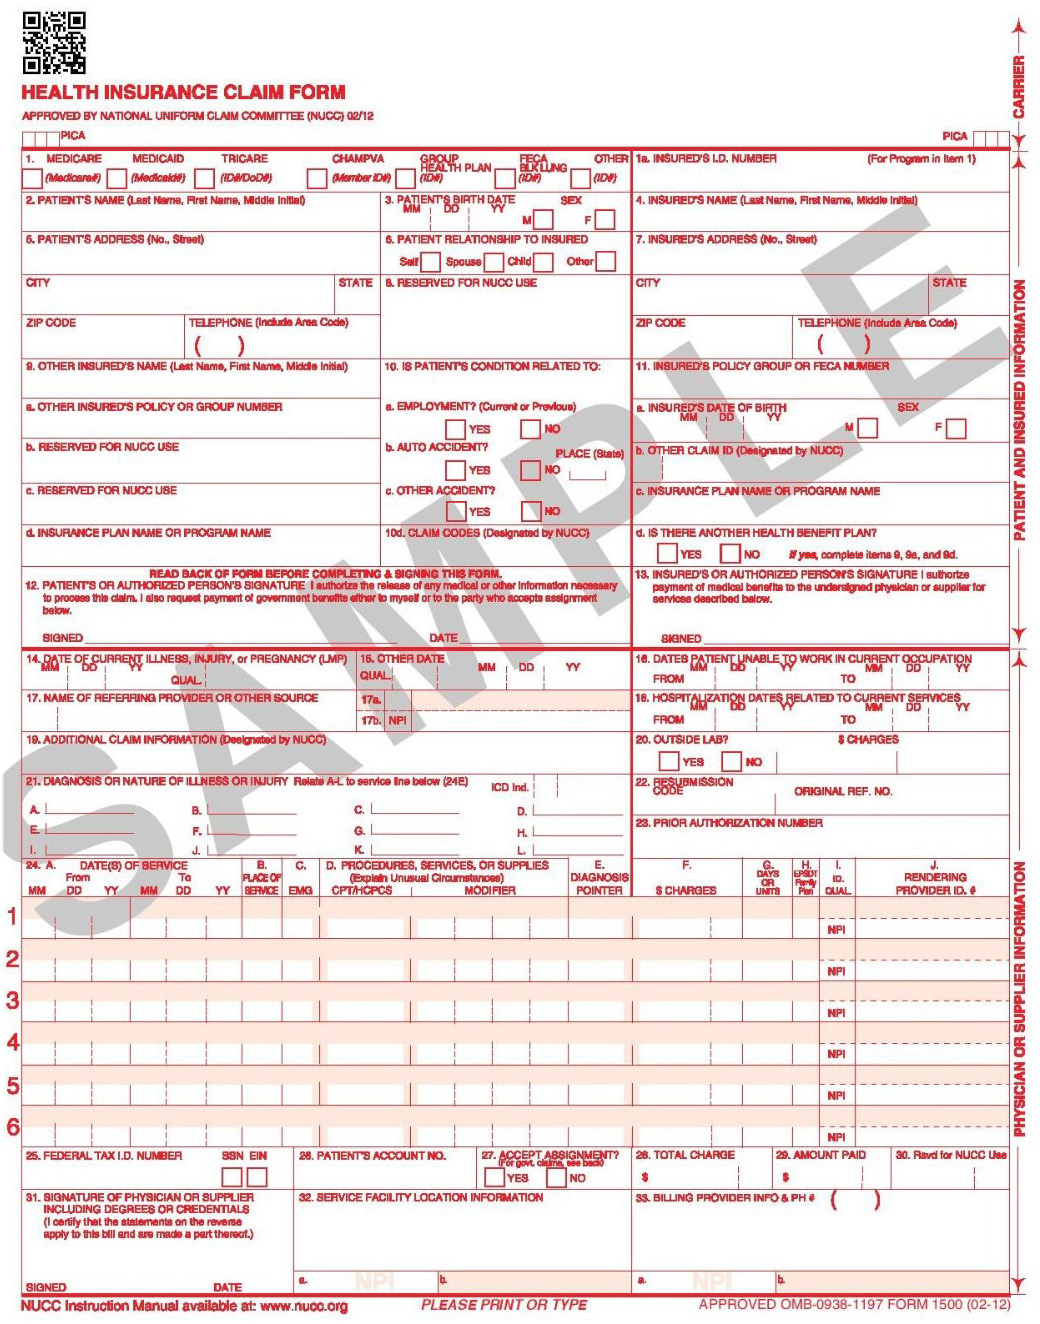 1b CMS 1500 INSURANCE CLAIM FORM VER 02/12 CONTINUOUS FORMAT 